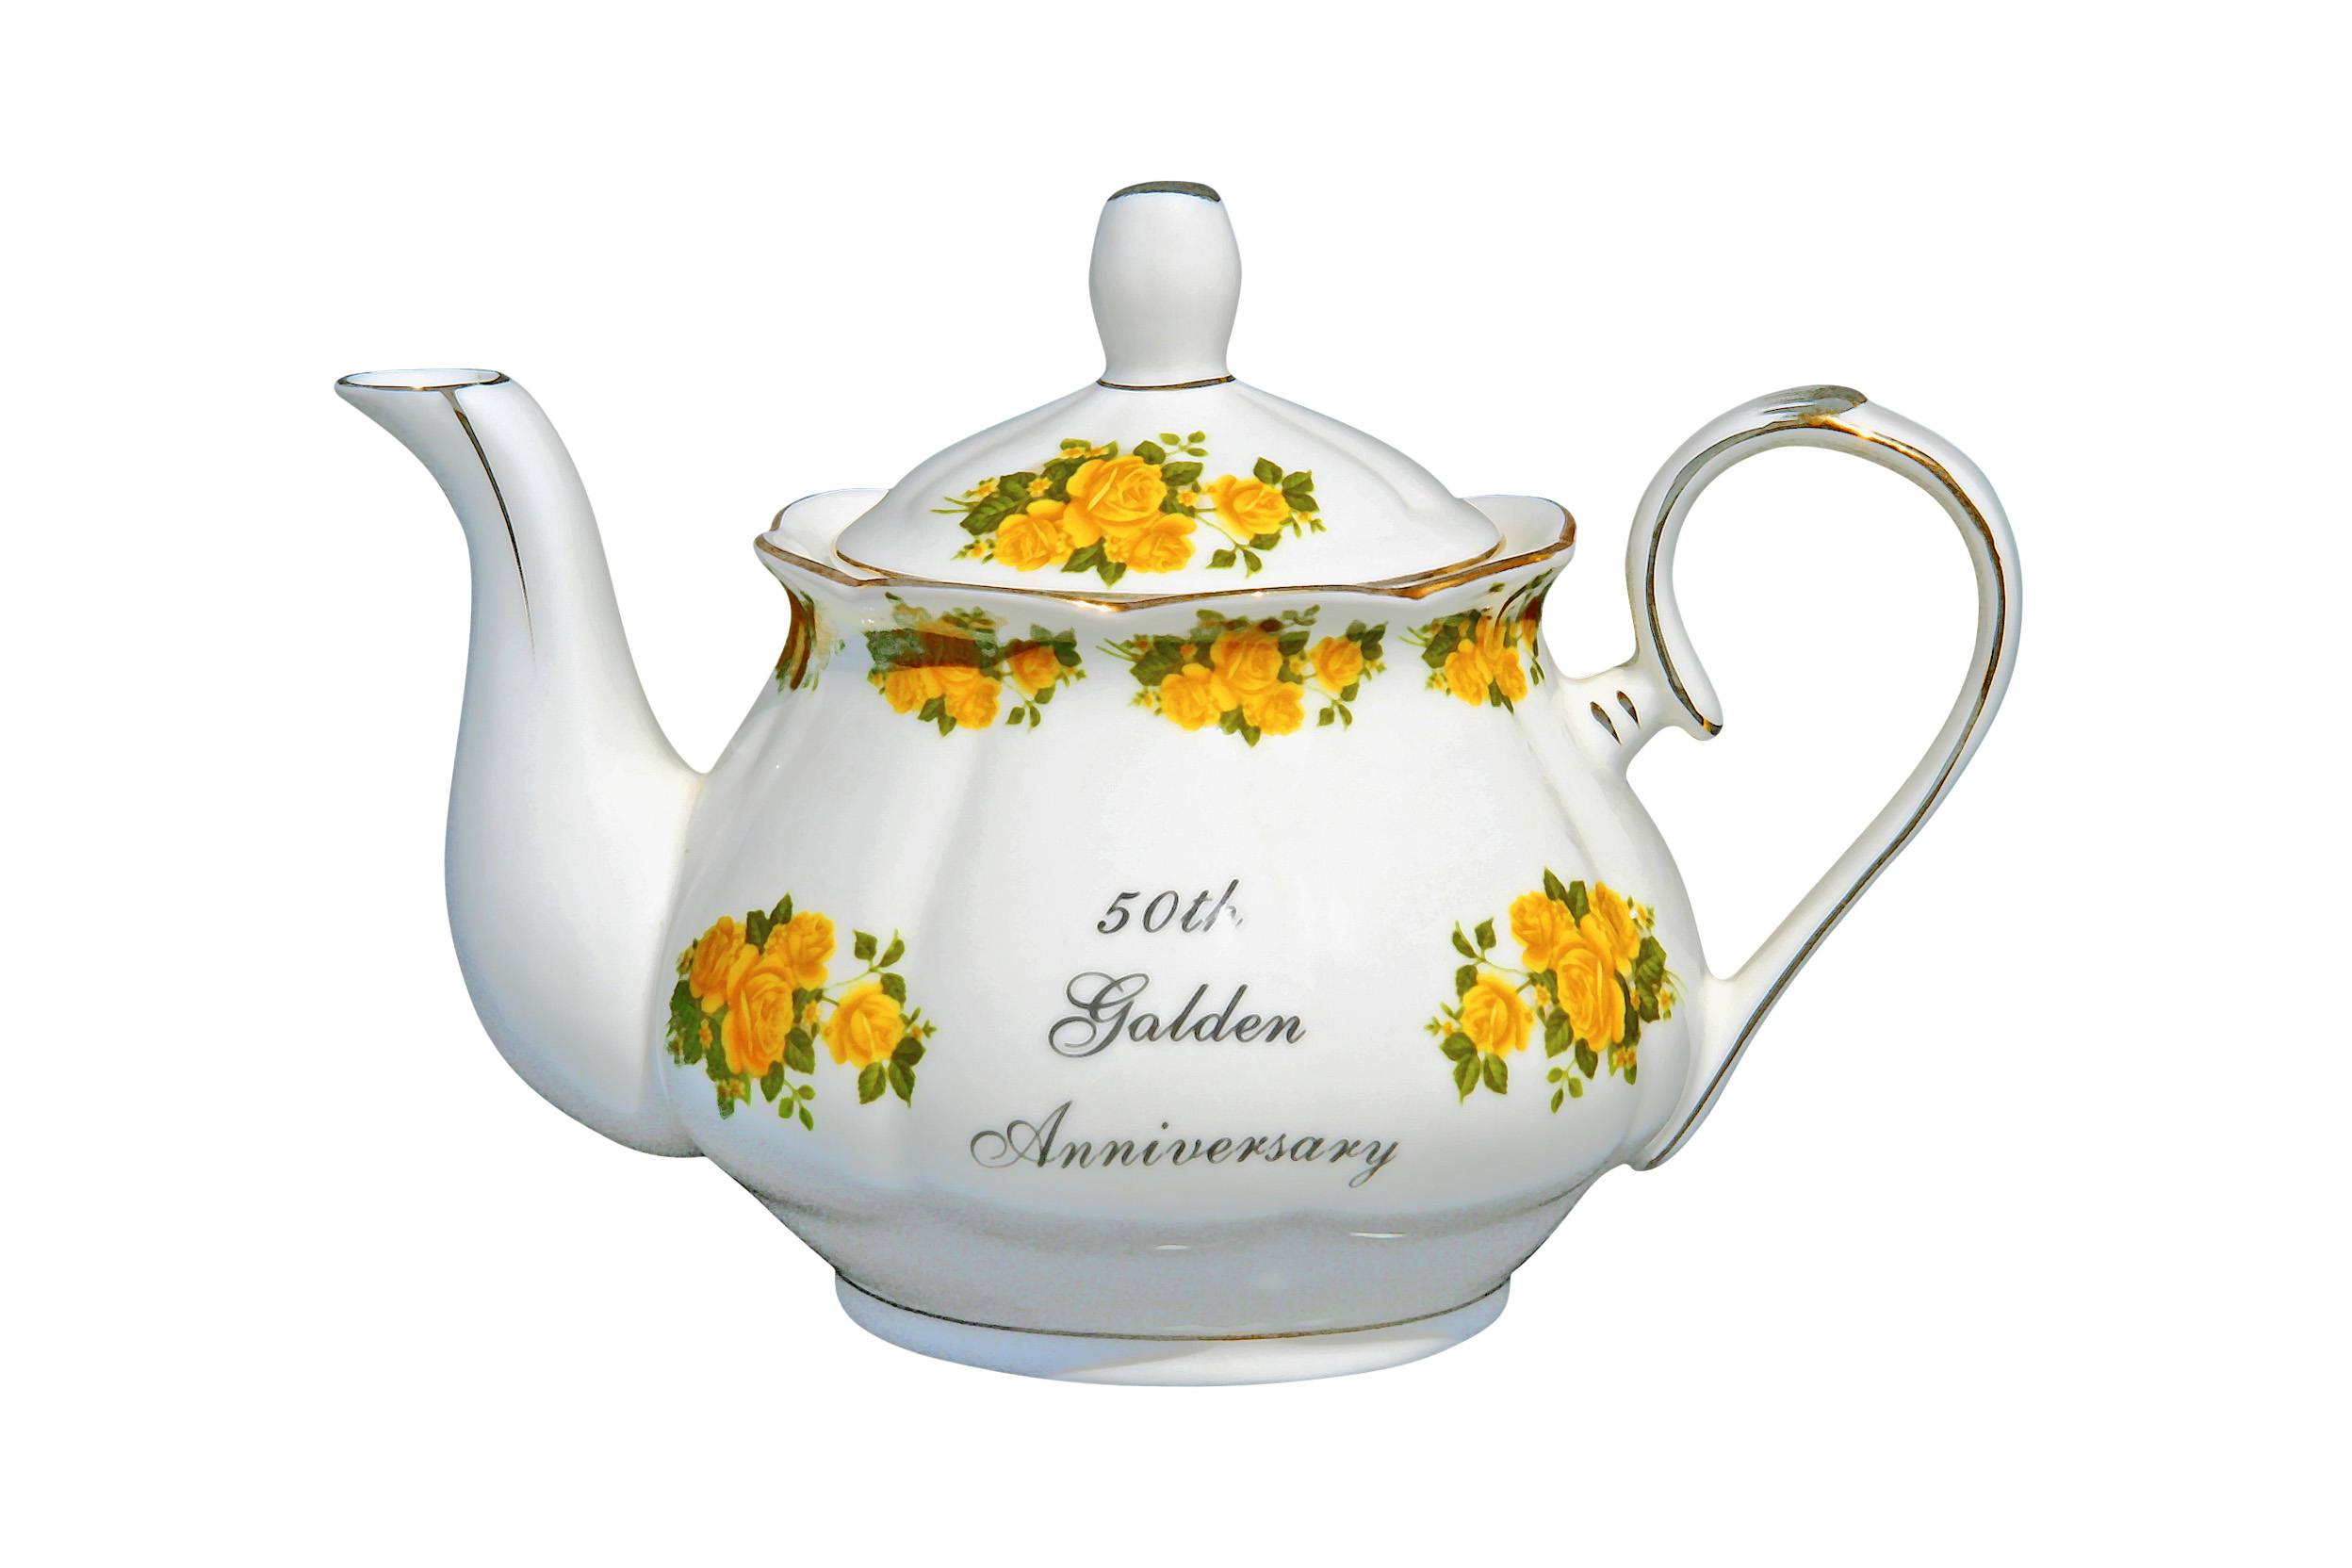 50th Anniversary 2 cup Teapot